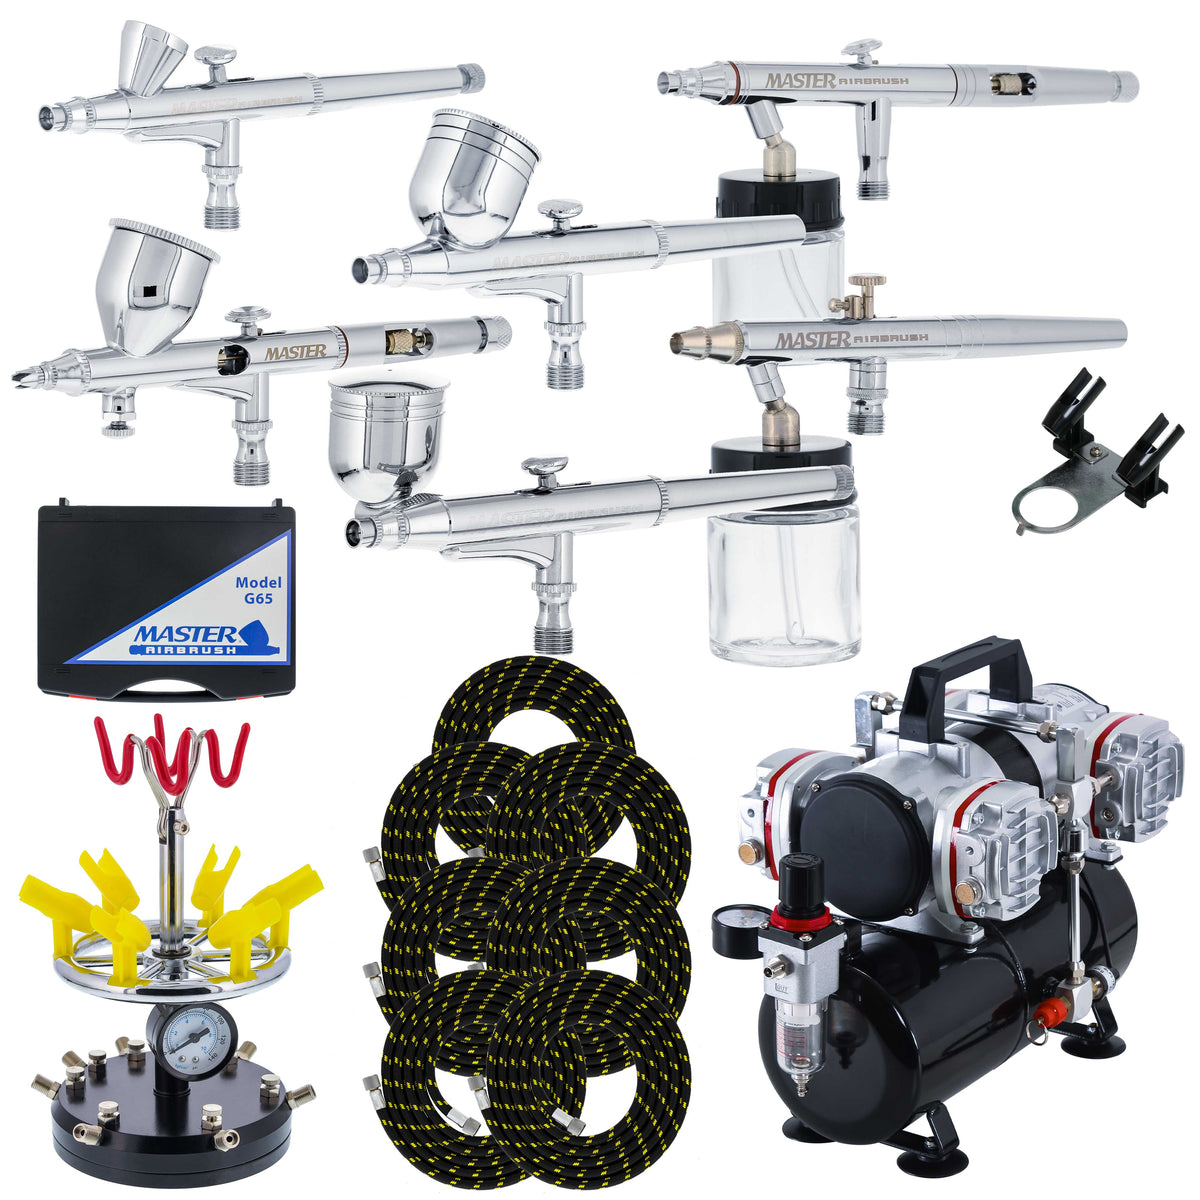 3 Multi-Purpose Master Airbrush Kit with High Performance Compact